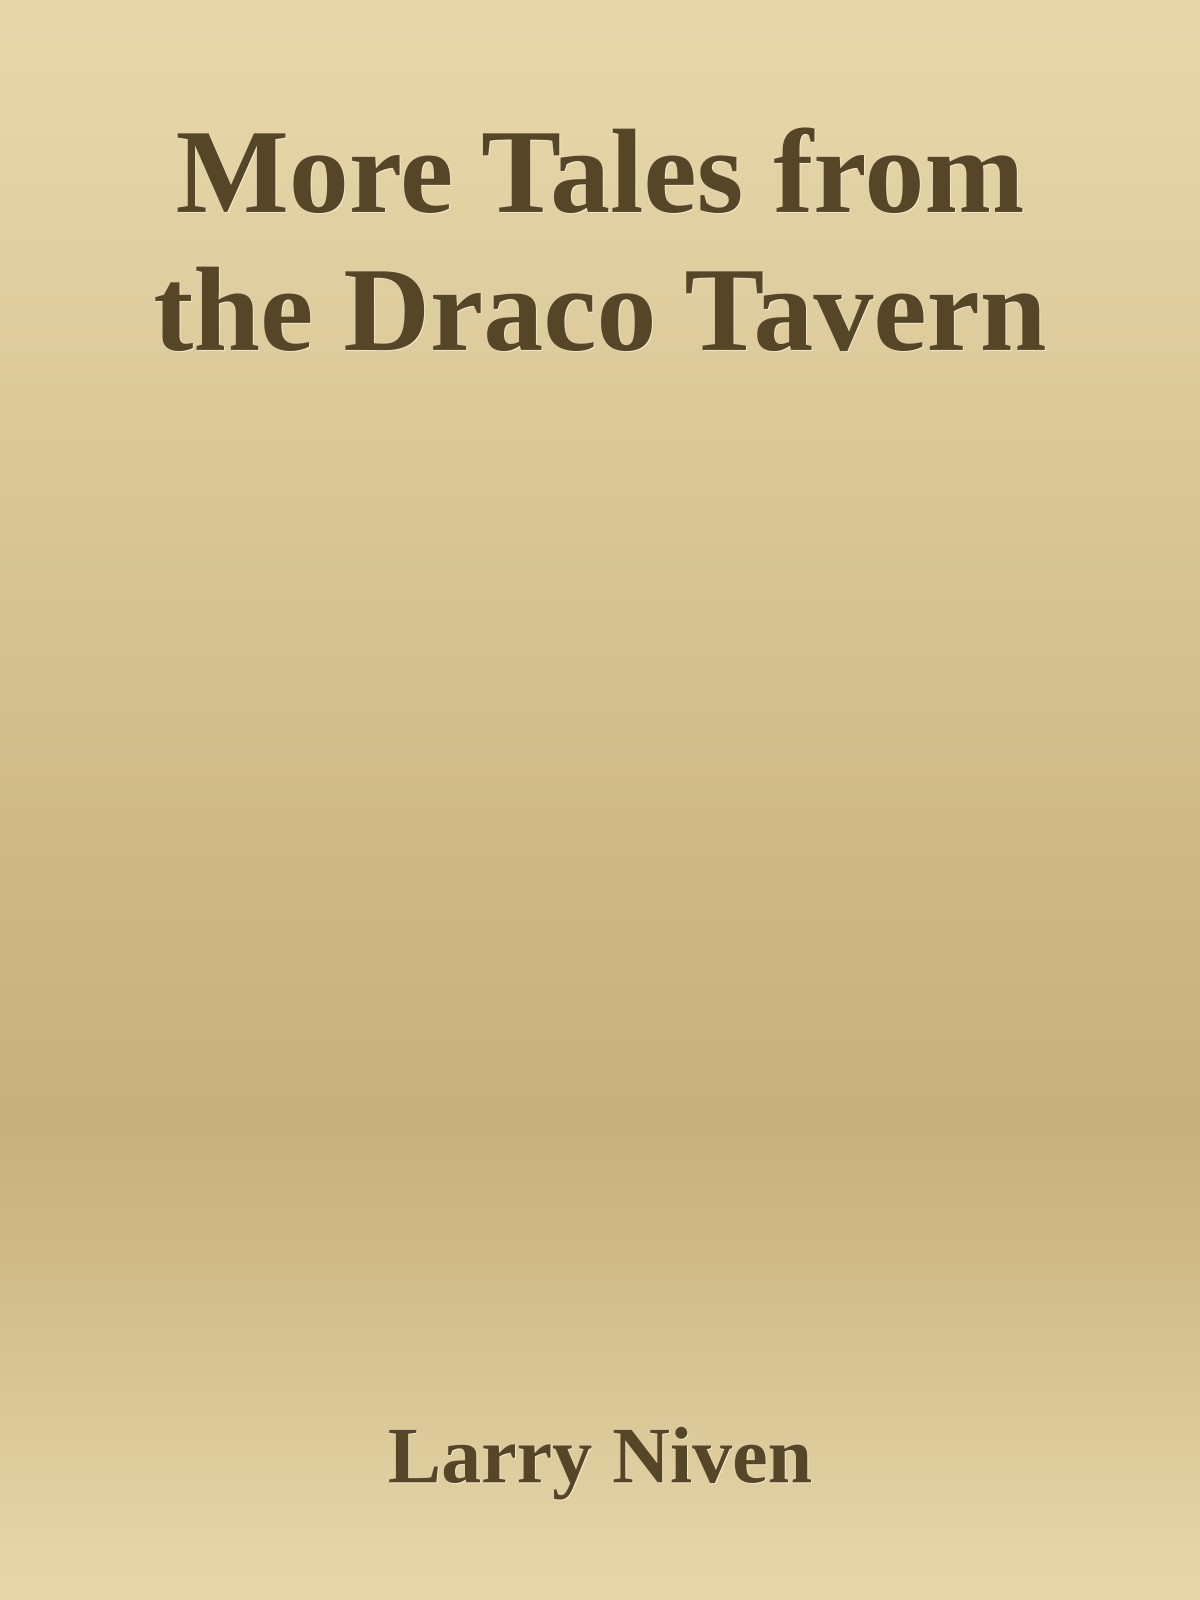 More Tales from the Draco Tavern